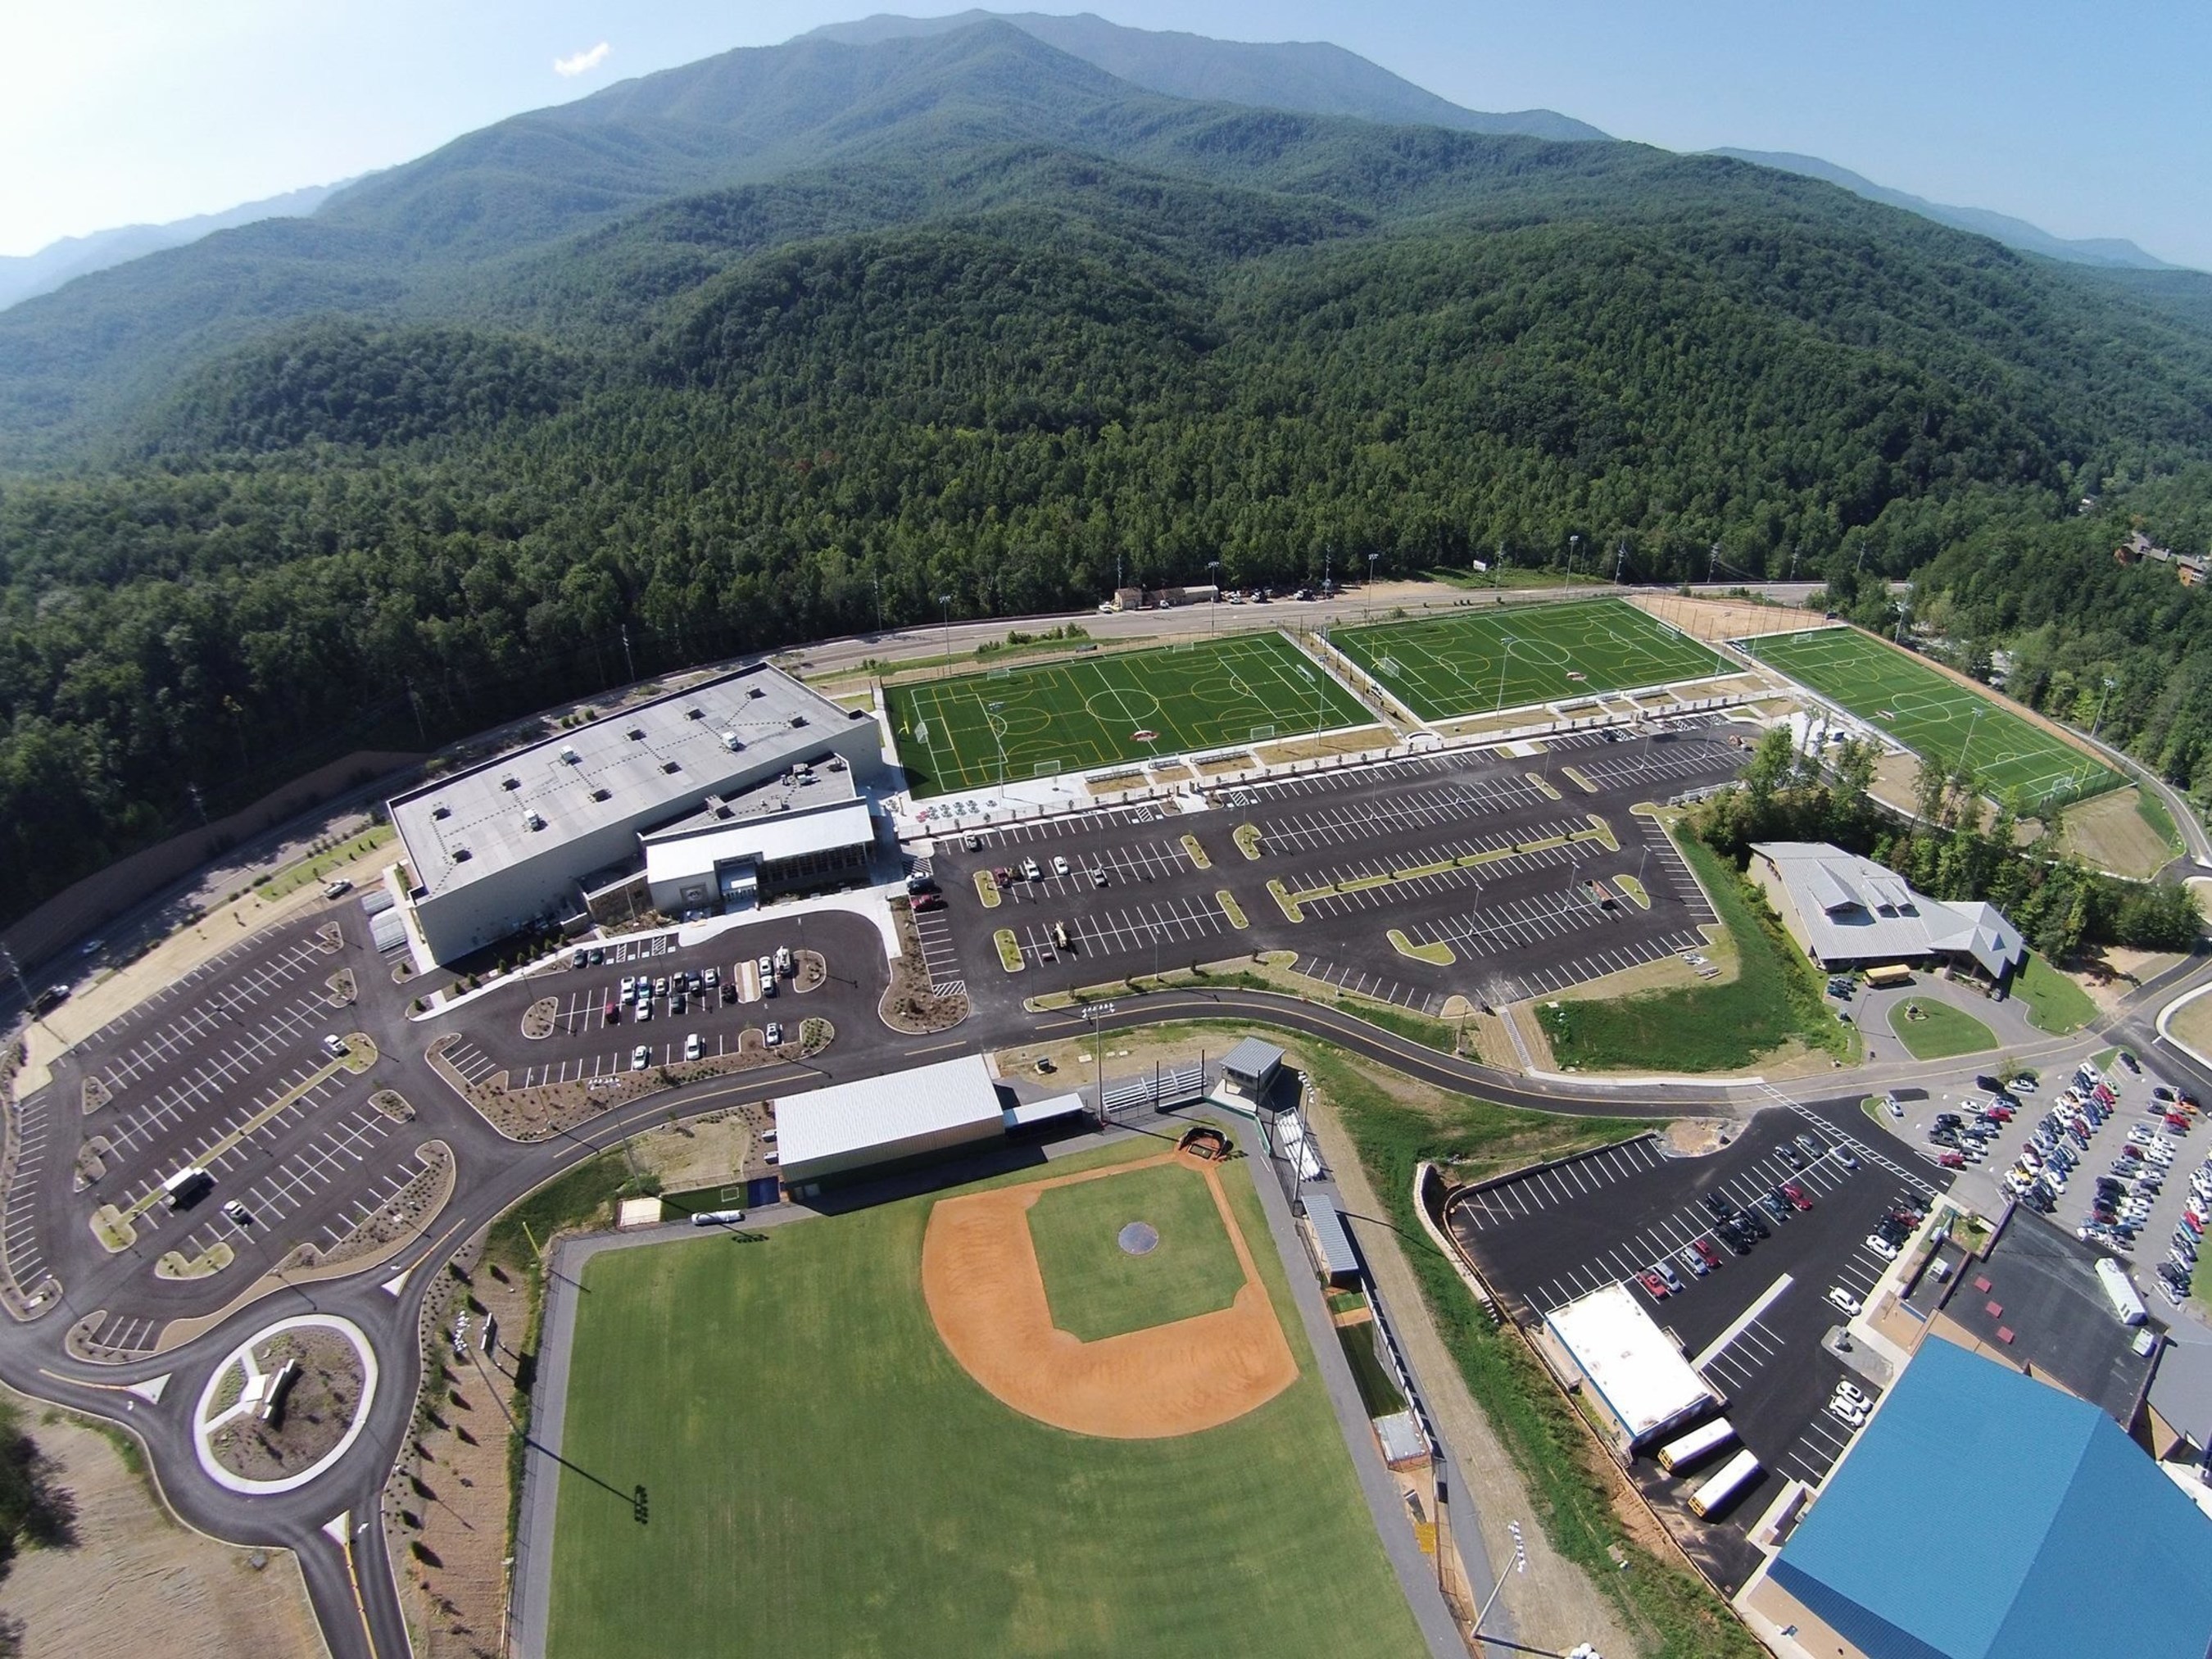 Rocky Top Sports World located in Gatlinburg, Tennessee has outsourced their management services to The Sports Facilities Management (SFM).